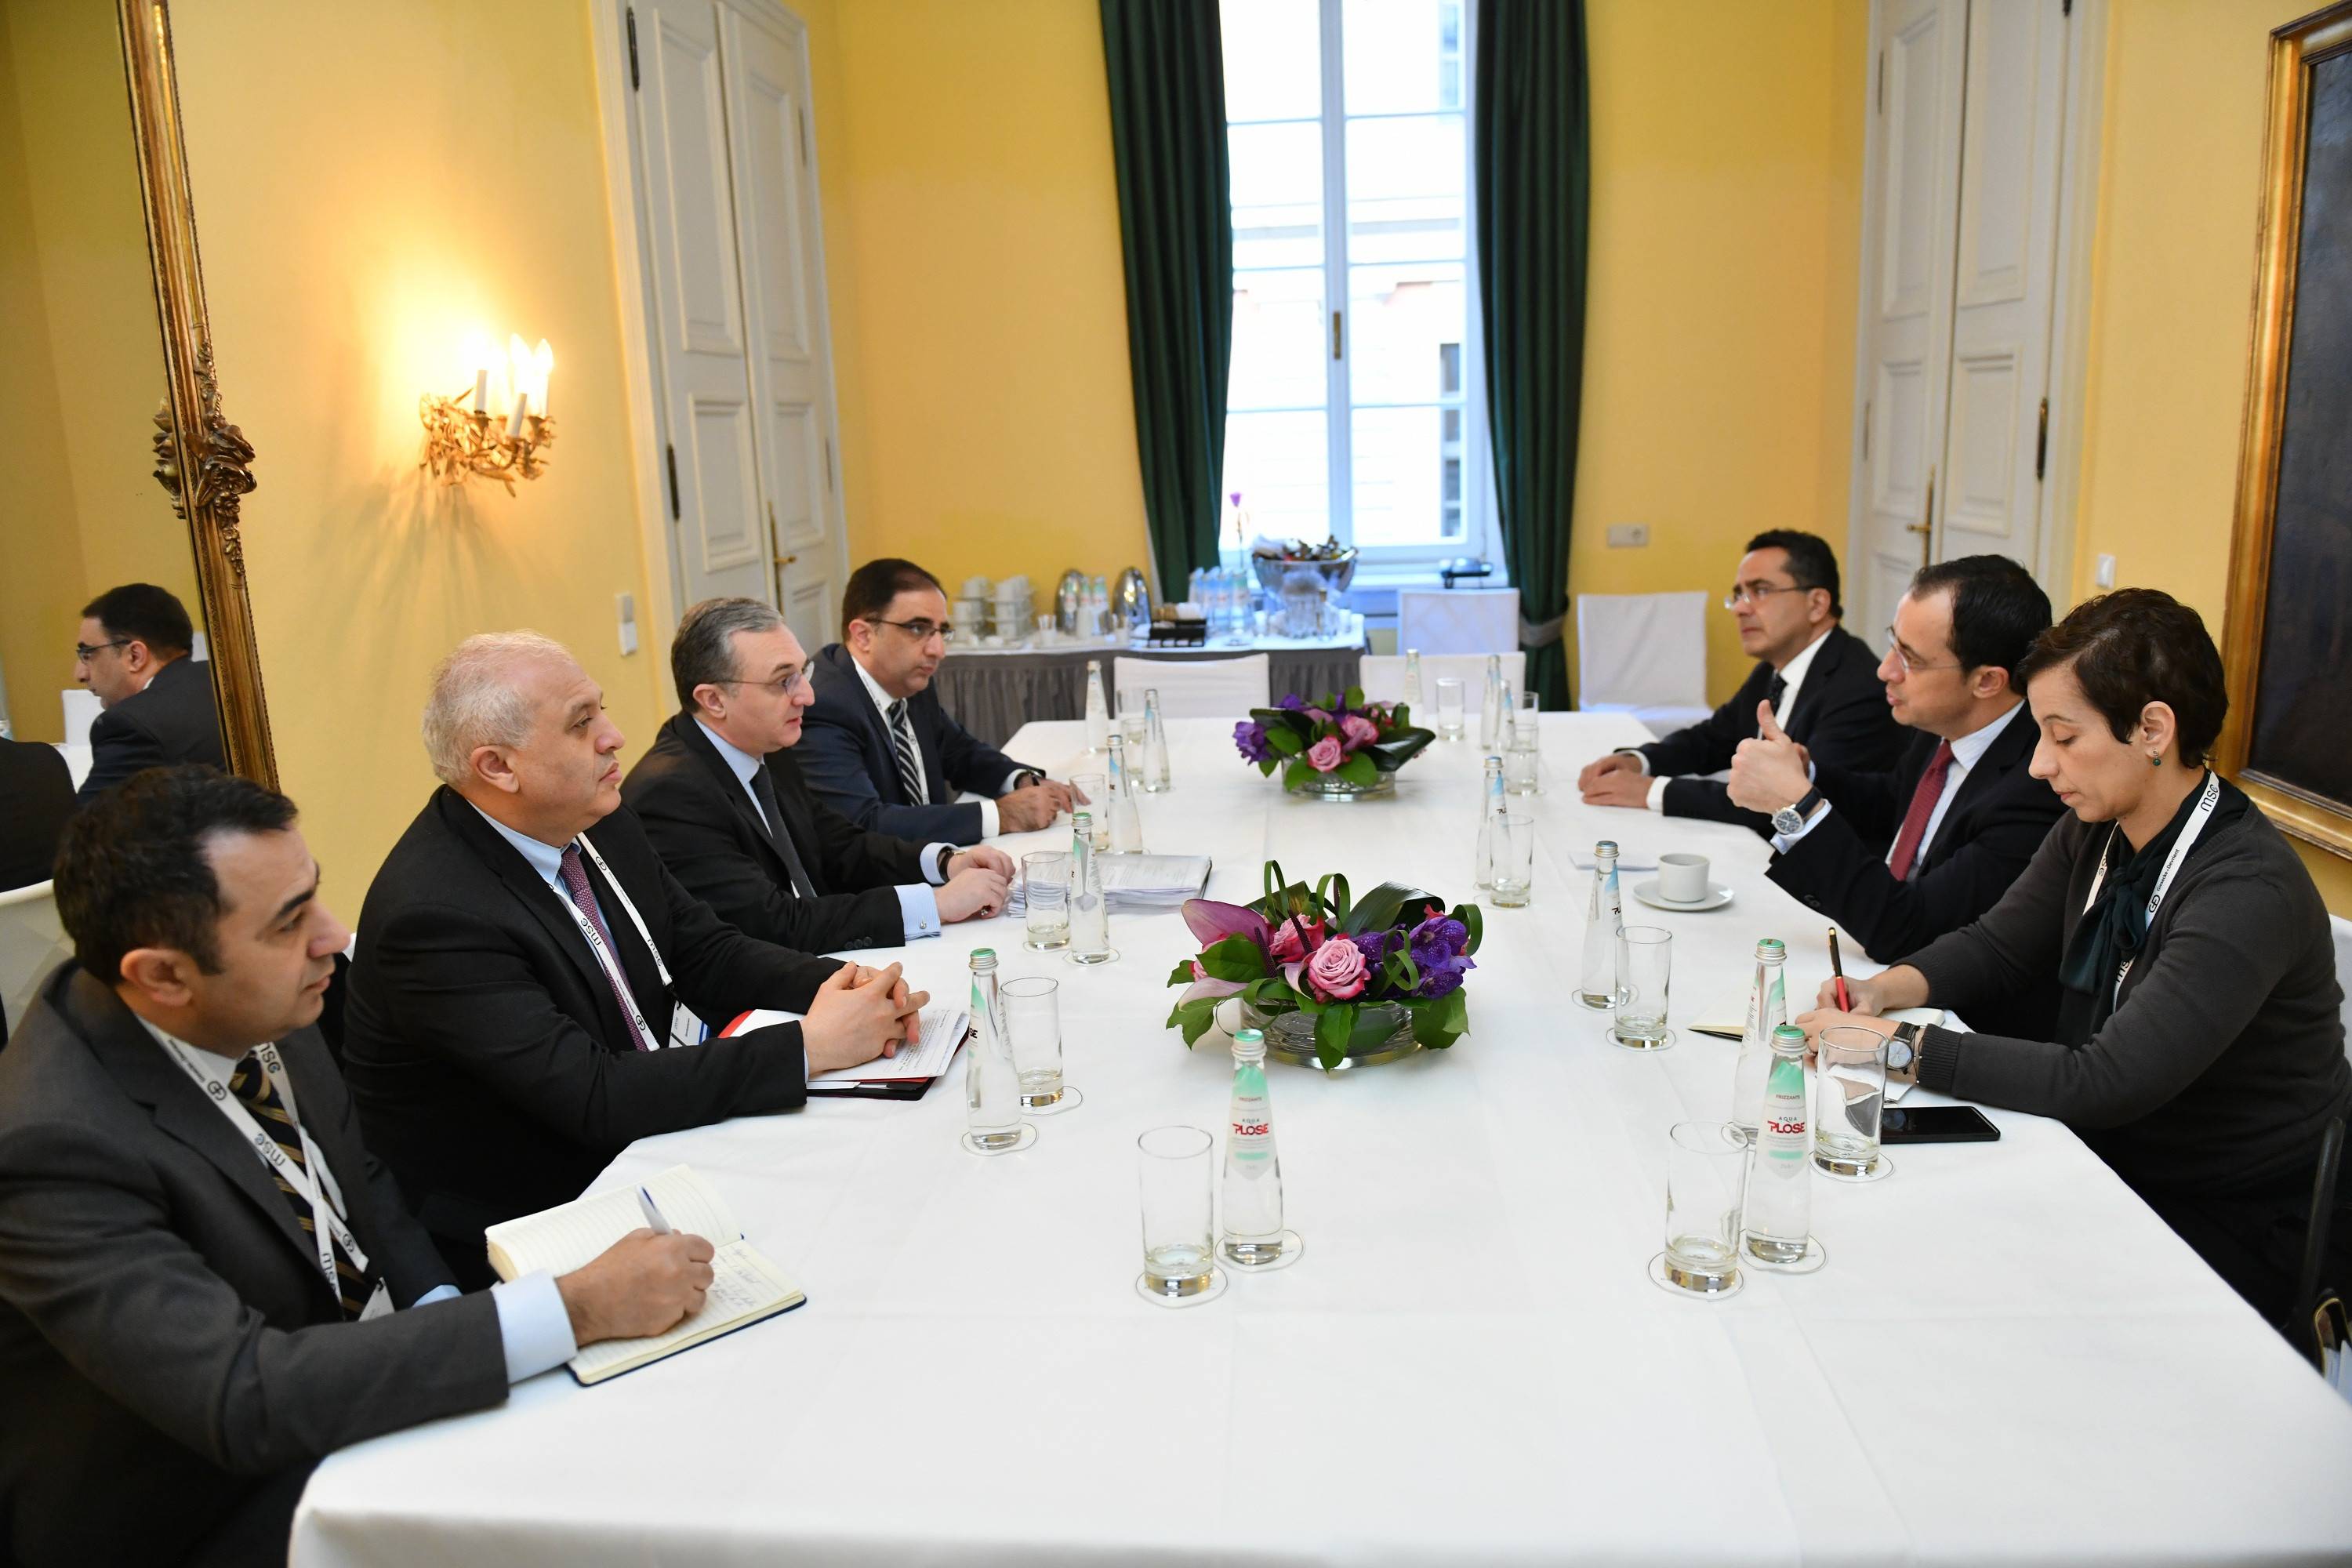 The Foreign Minister of Armenia met with the Foreign Minister of Cyprus